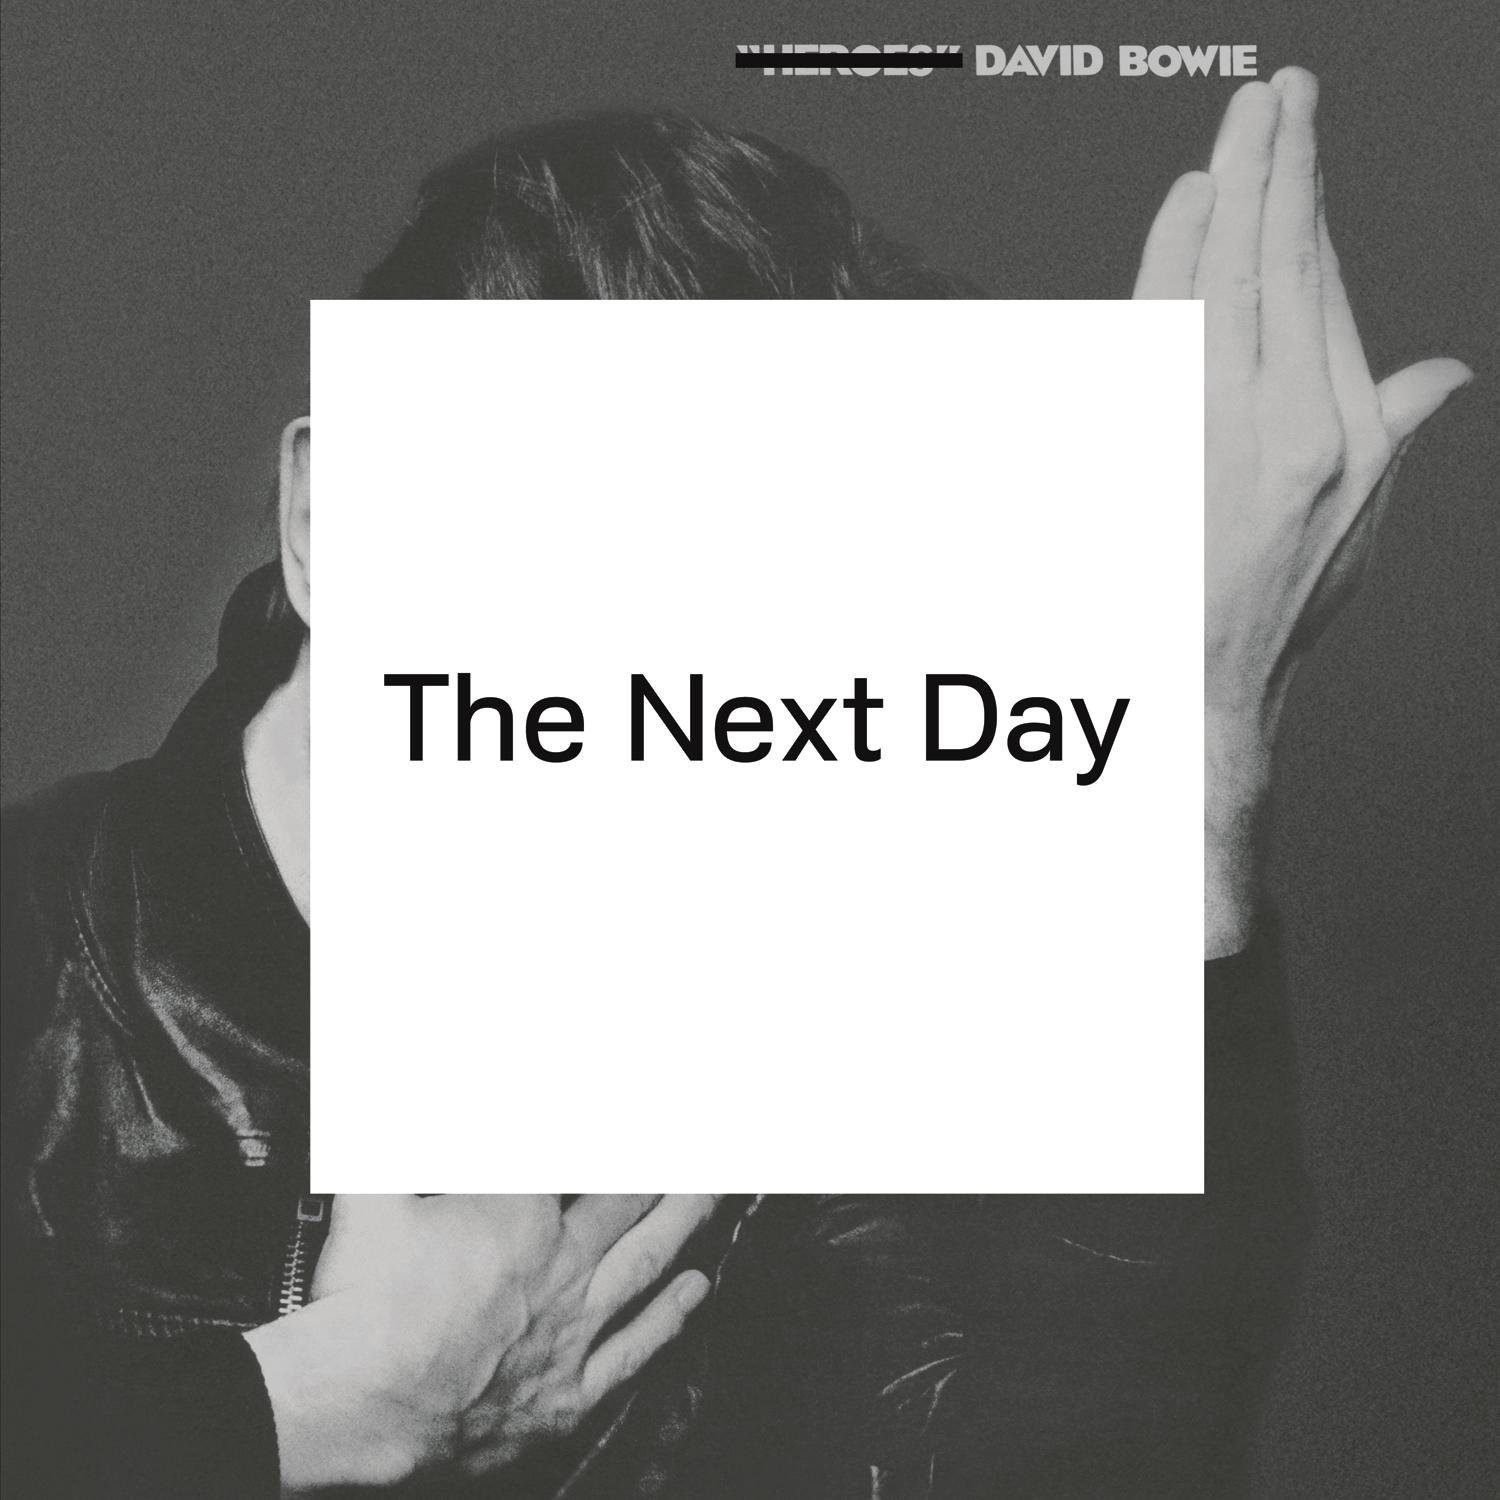 DAVID BOWIE – THE NEXT DAY ON